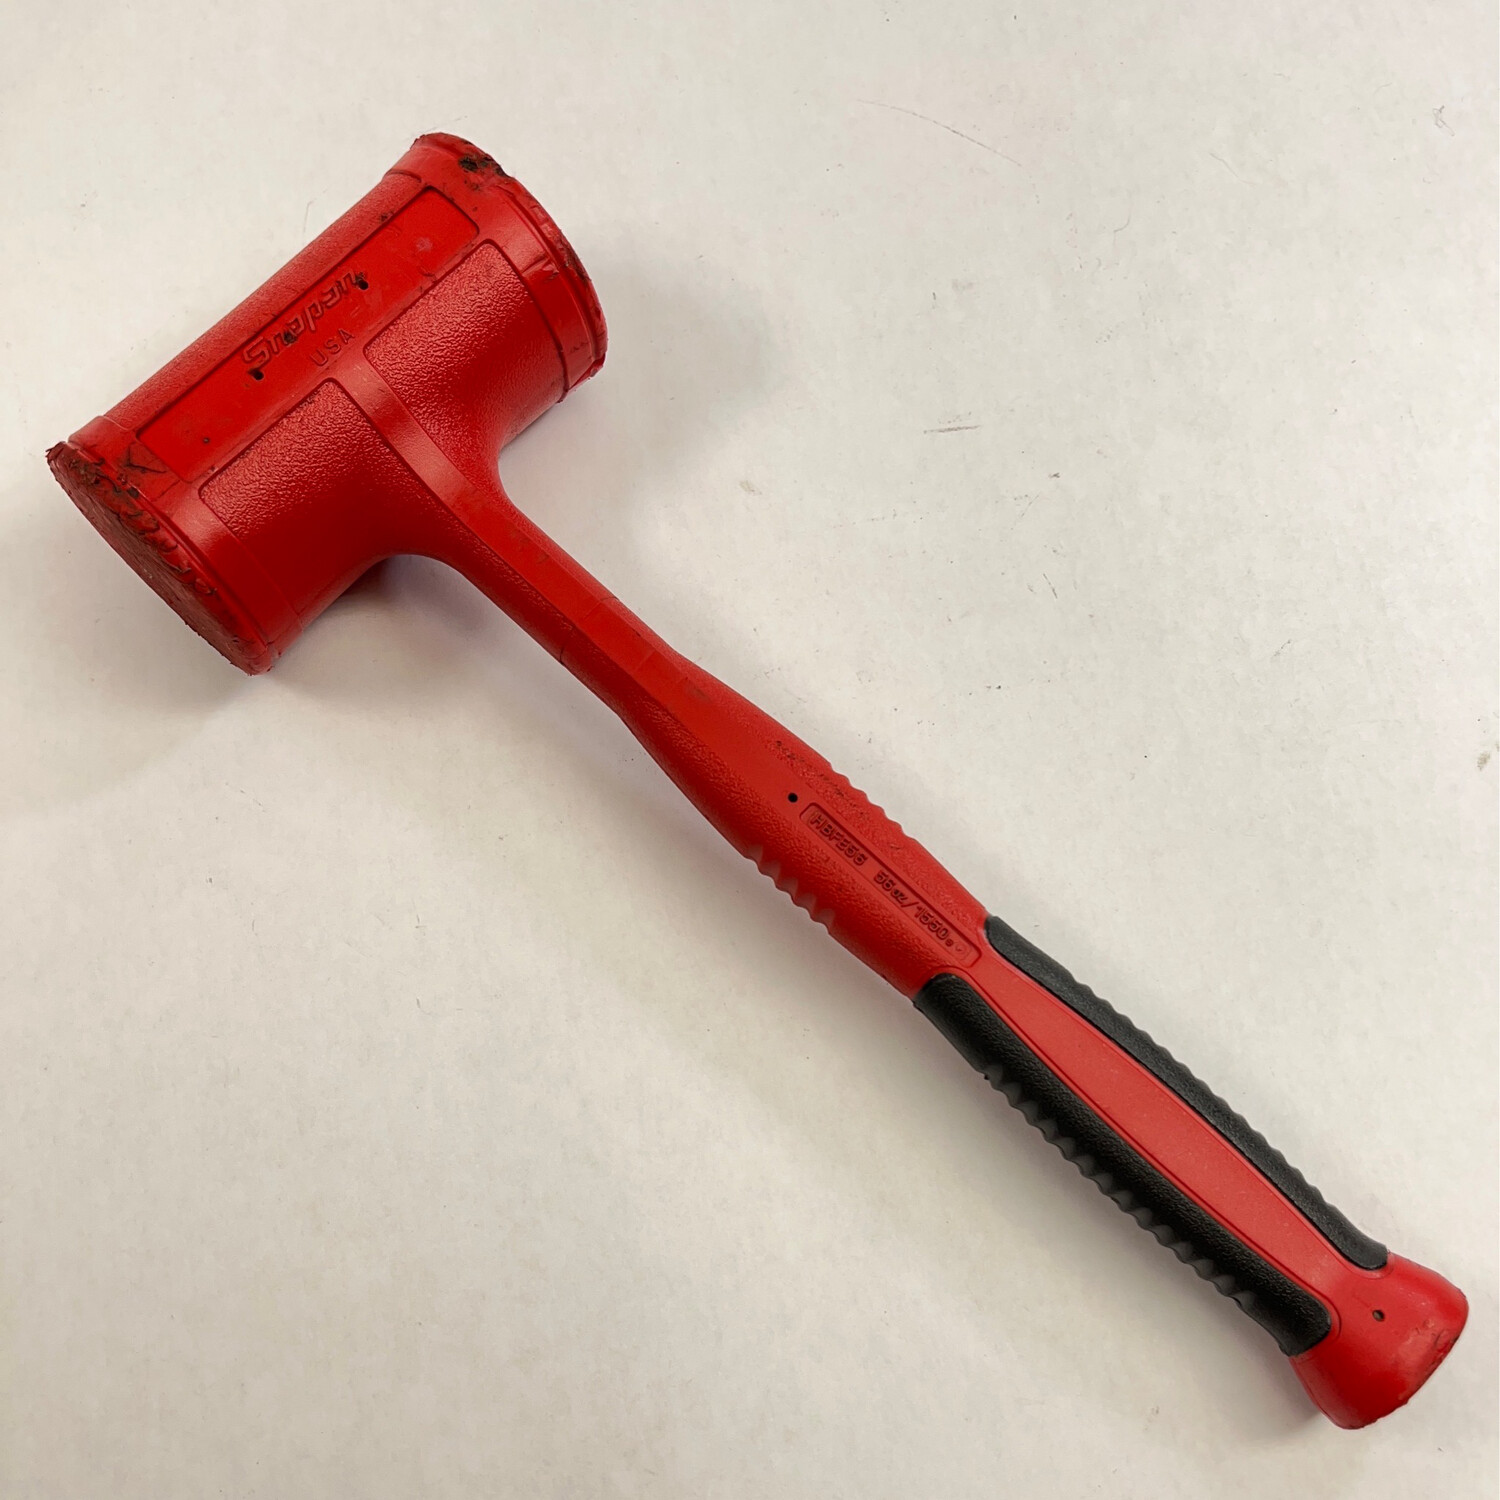 Snap On 56 oz Soft Grip Dead Blow Hammer, HBFE56